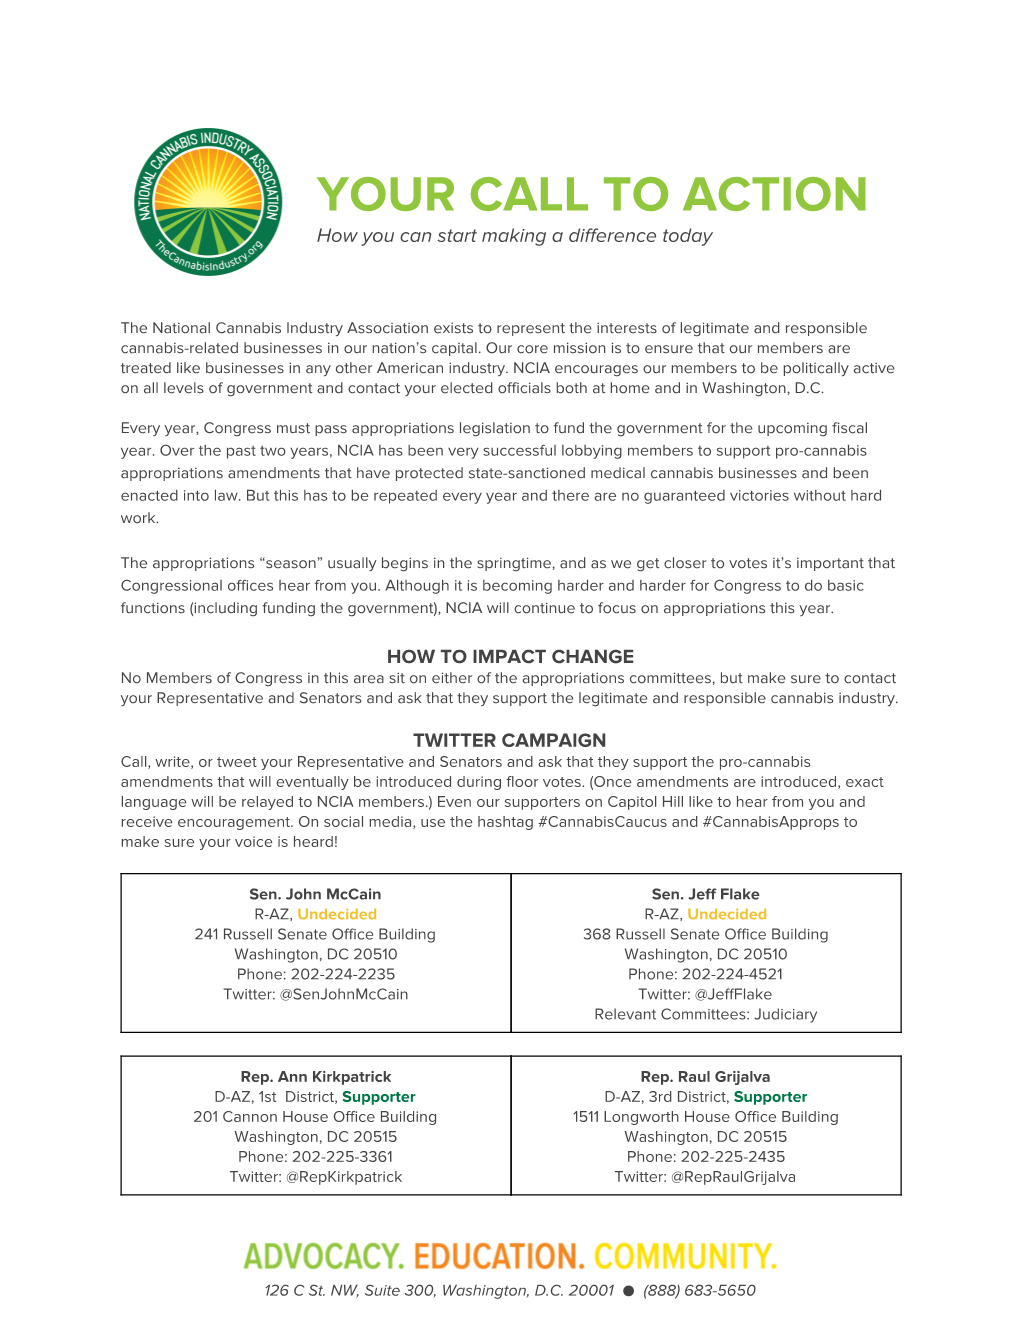 YOUR CALL to ACTION How You Can Start Making a Difference Today